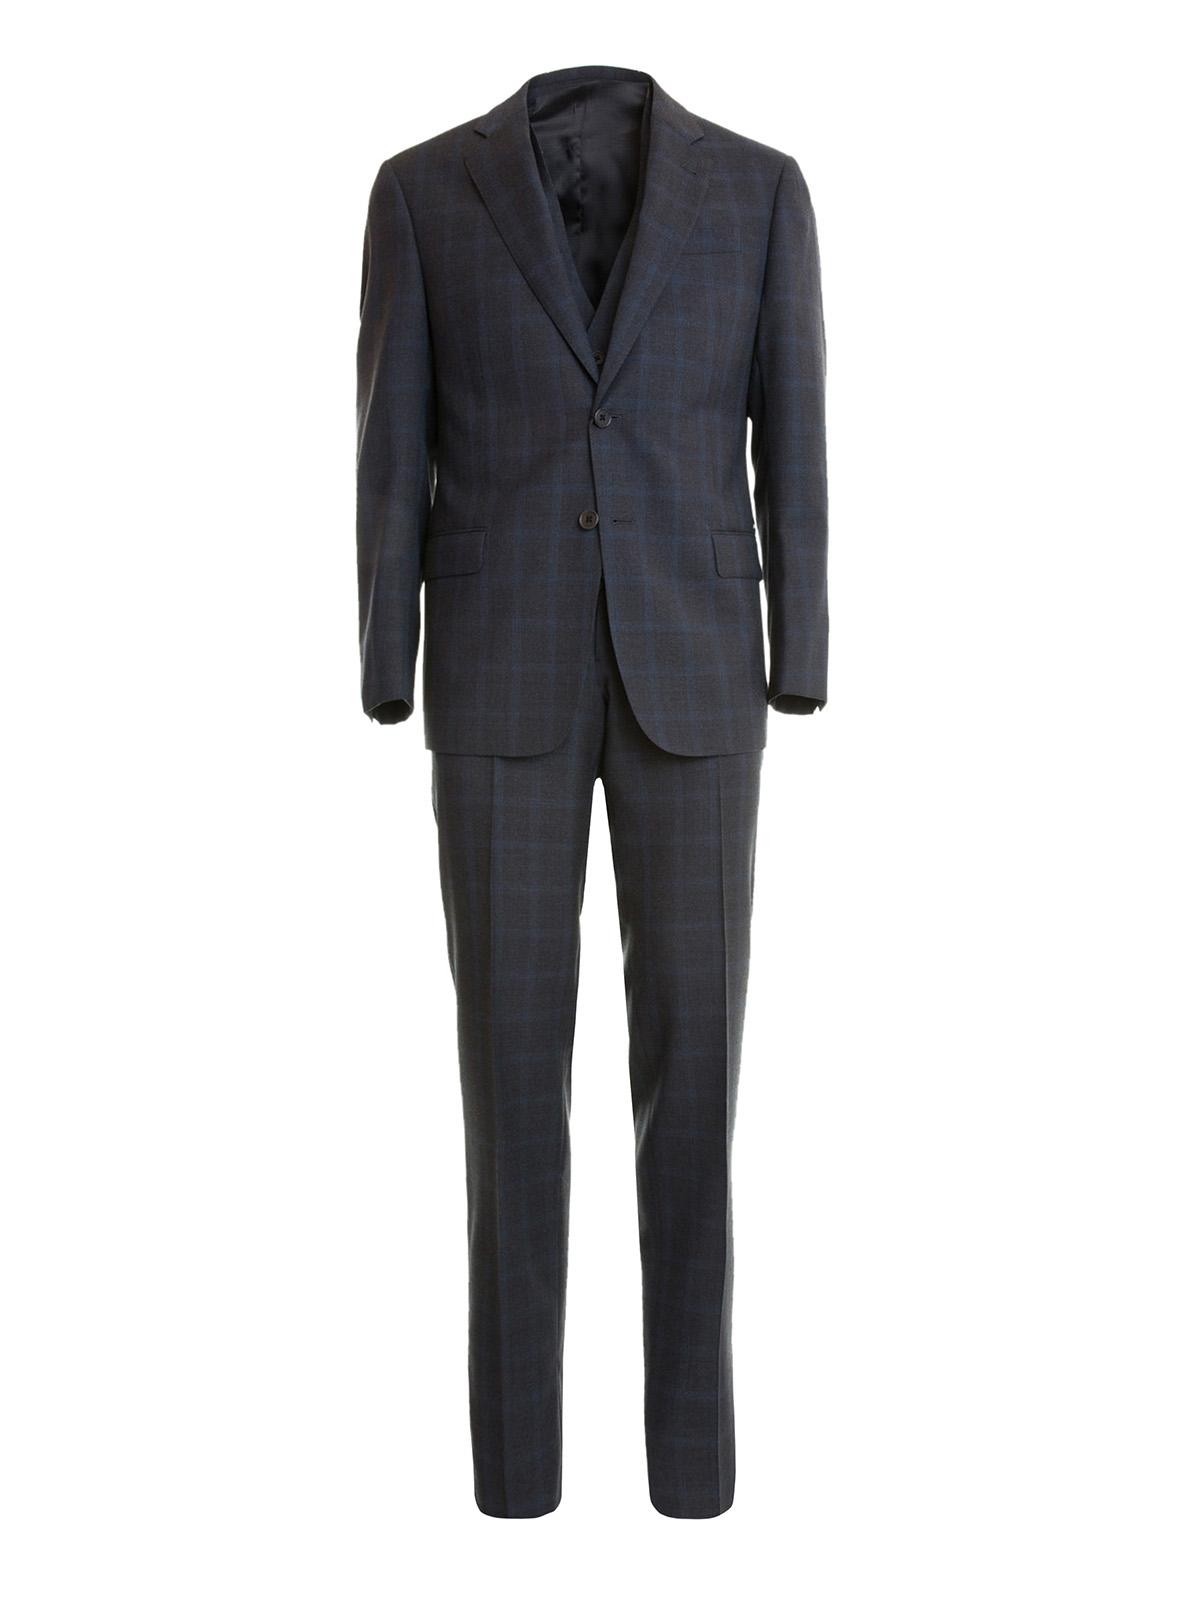 Armani G-line Checked Wool Formal Suit in Dark Blue (Blue) for Men - Lyst